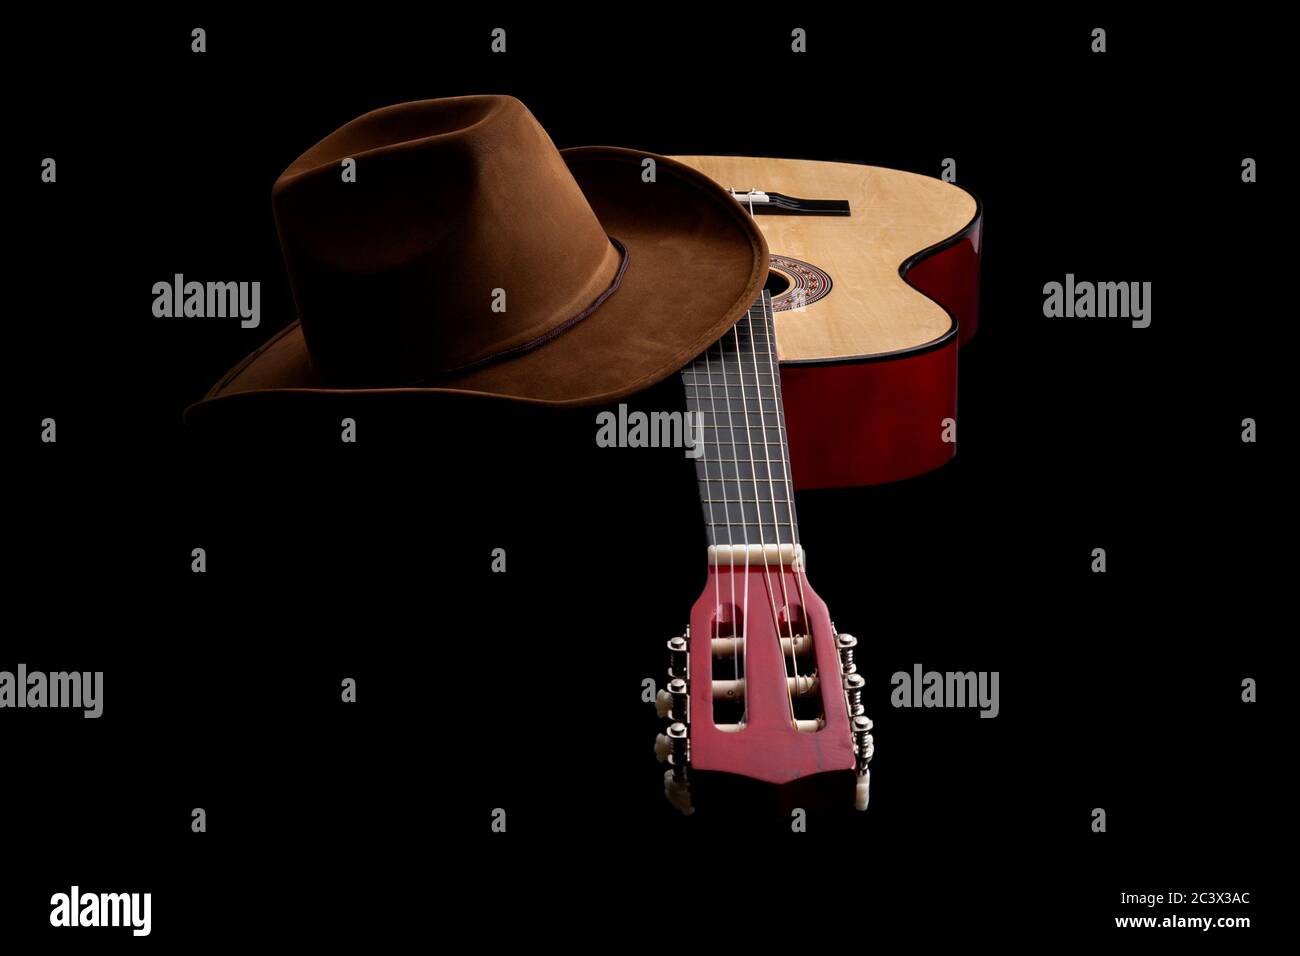 American culture, folk song and country muisc concept theme with a cowboy hat and an acoustic guitar isolated on black background with dramatic lighti Stock Photo